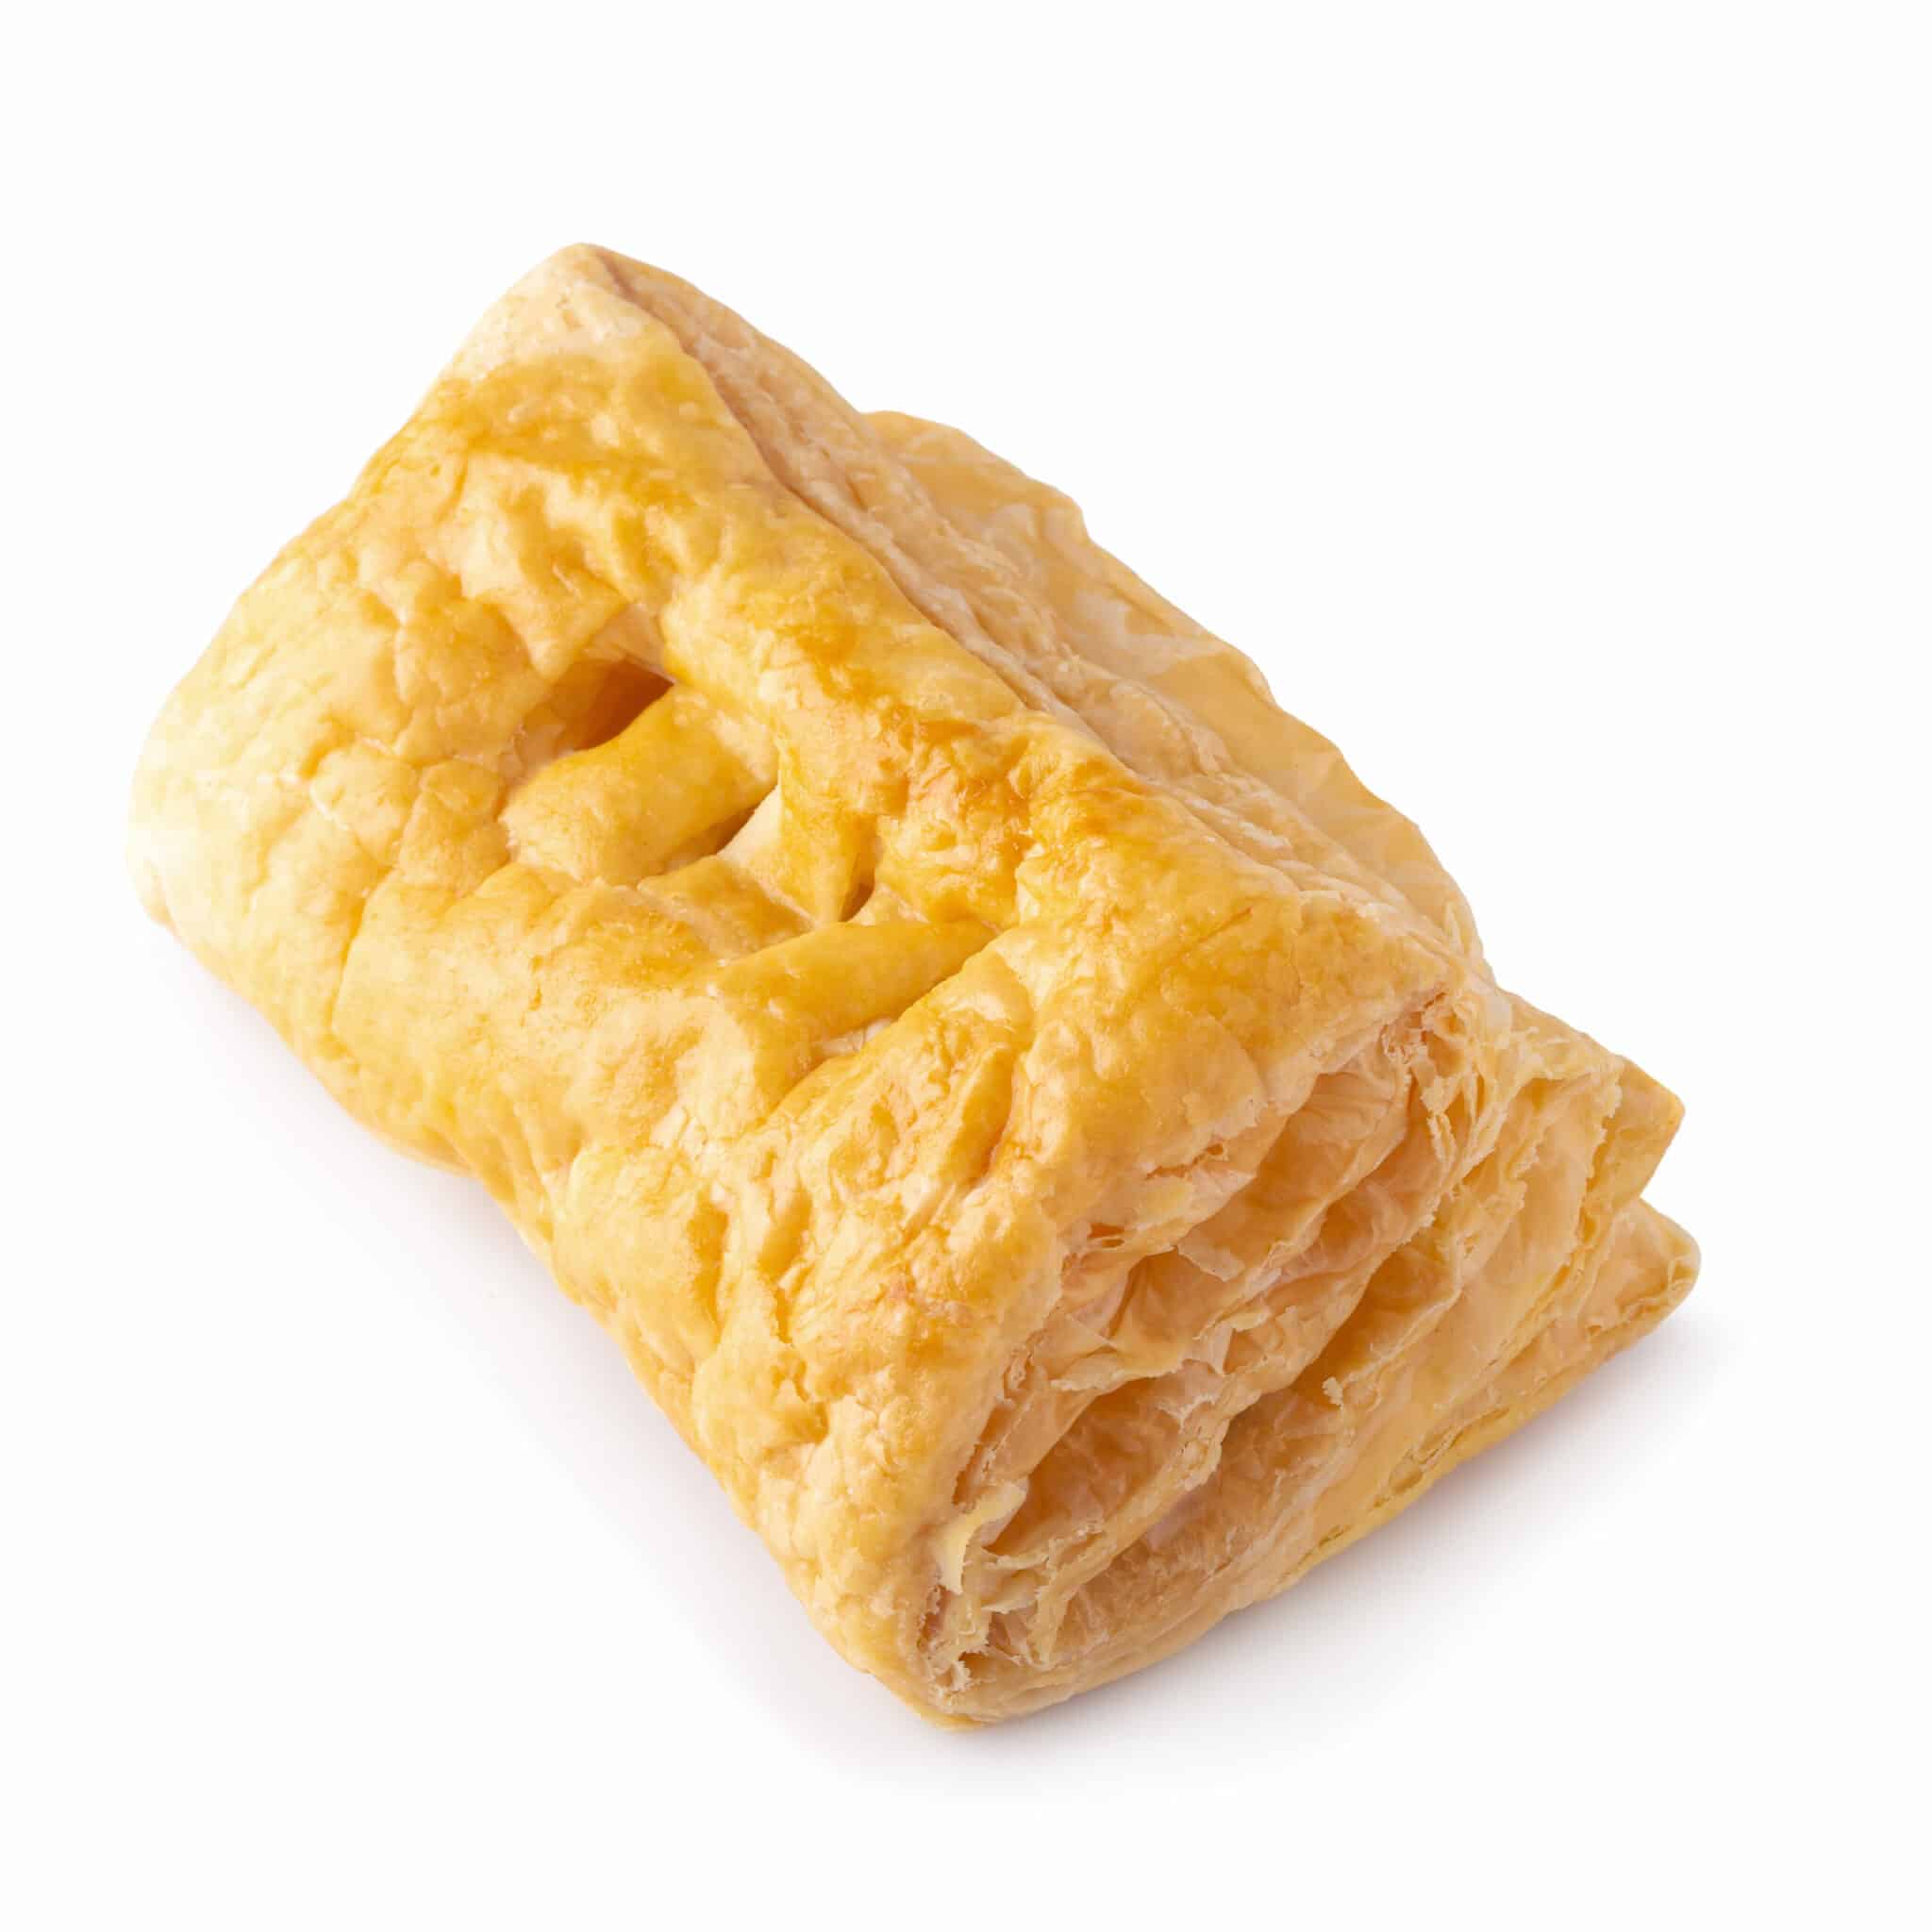 How long to Cook Puff Pastry